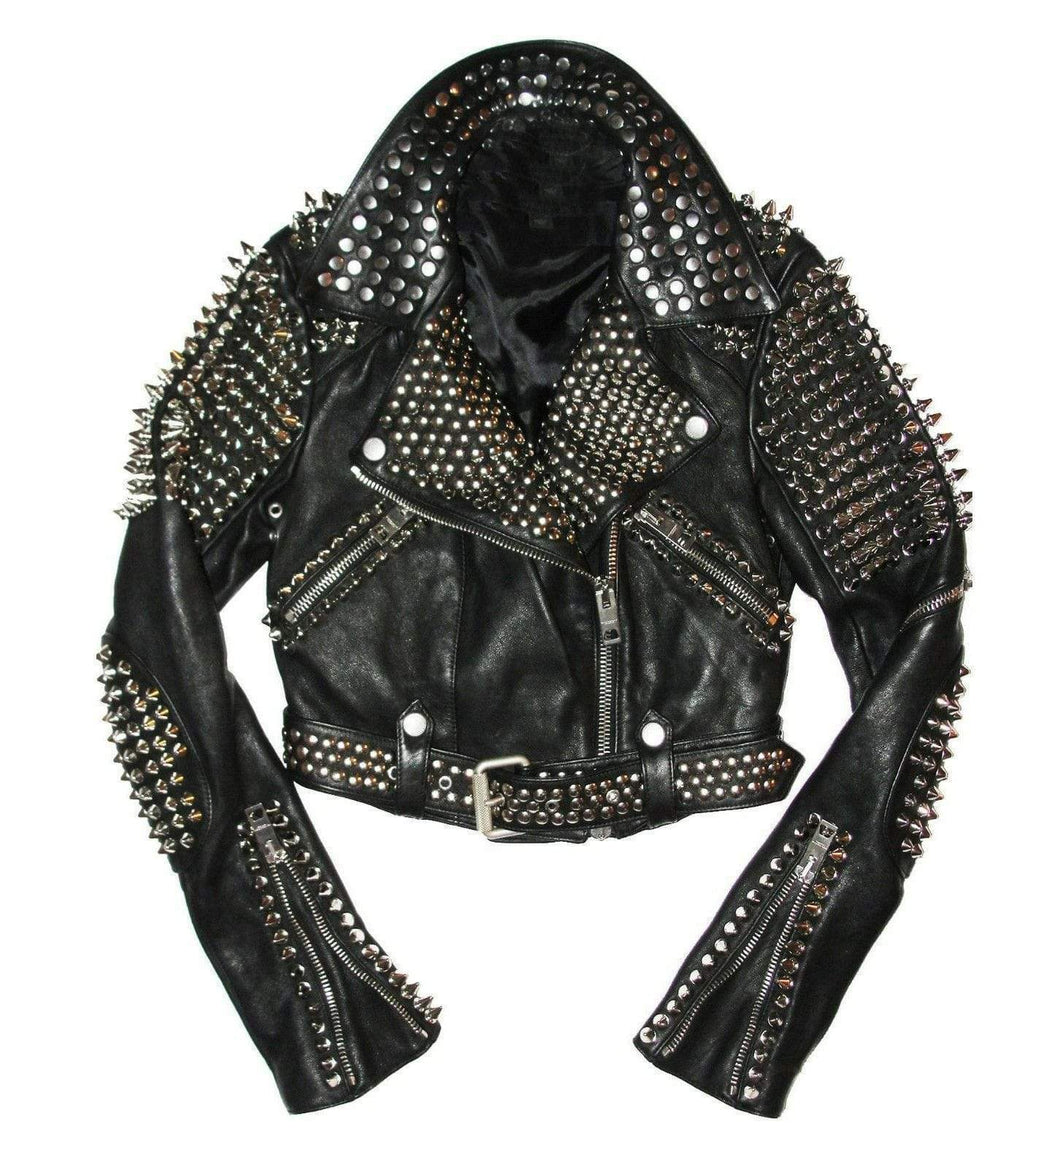 Full Black Punk Brando Silver Spiked Studded Cowhide Leather Jacket - Shearling leather